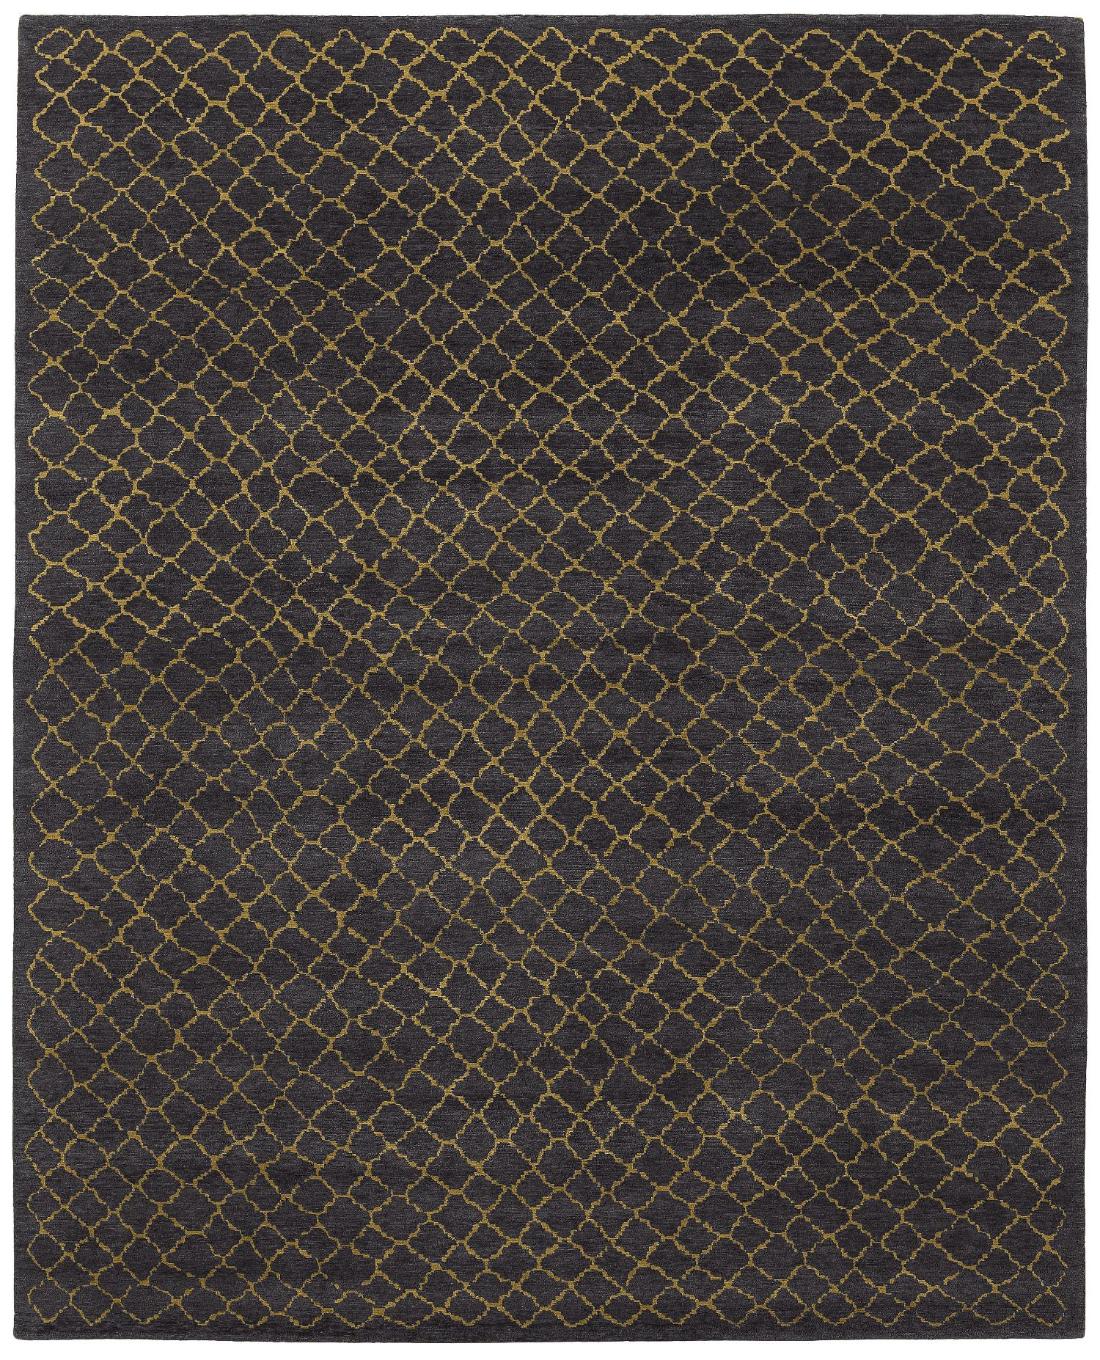 Ululu Hand-Knotted Rug ☞ Size: 250 x 300 cm